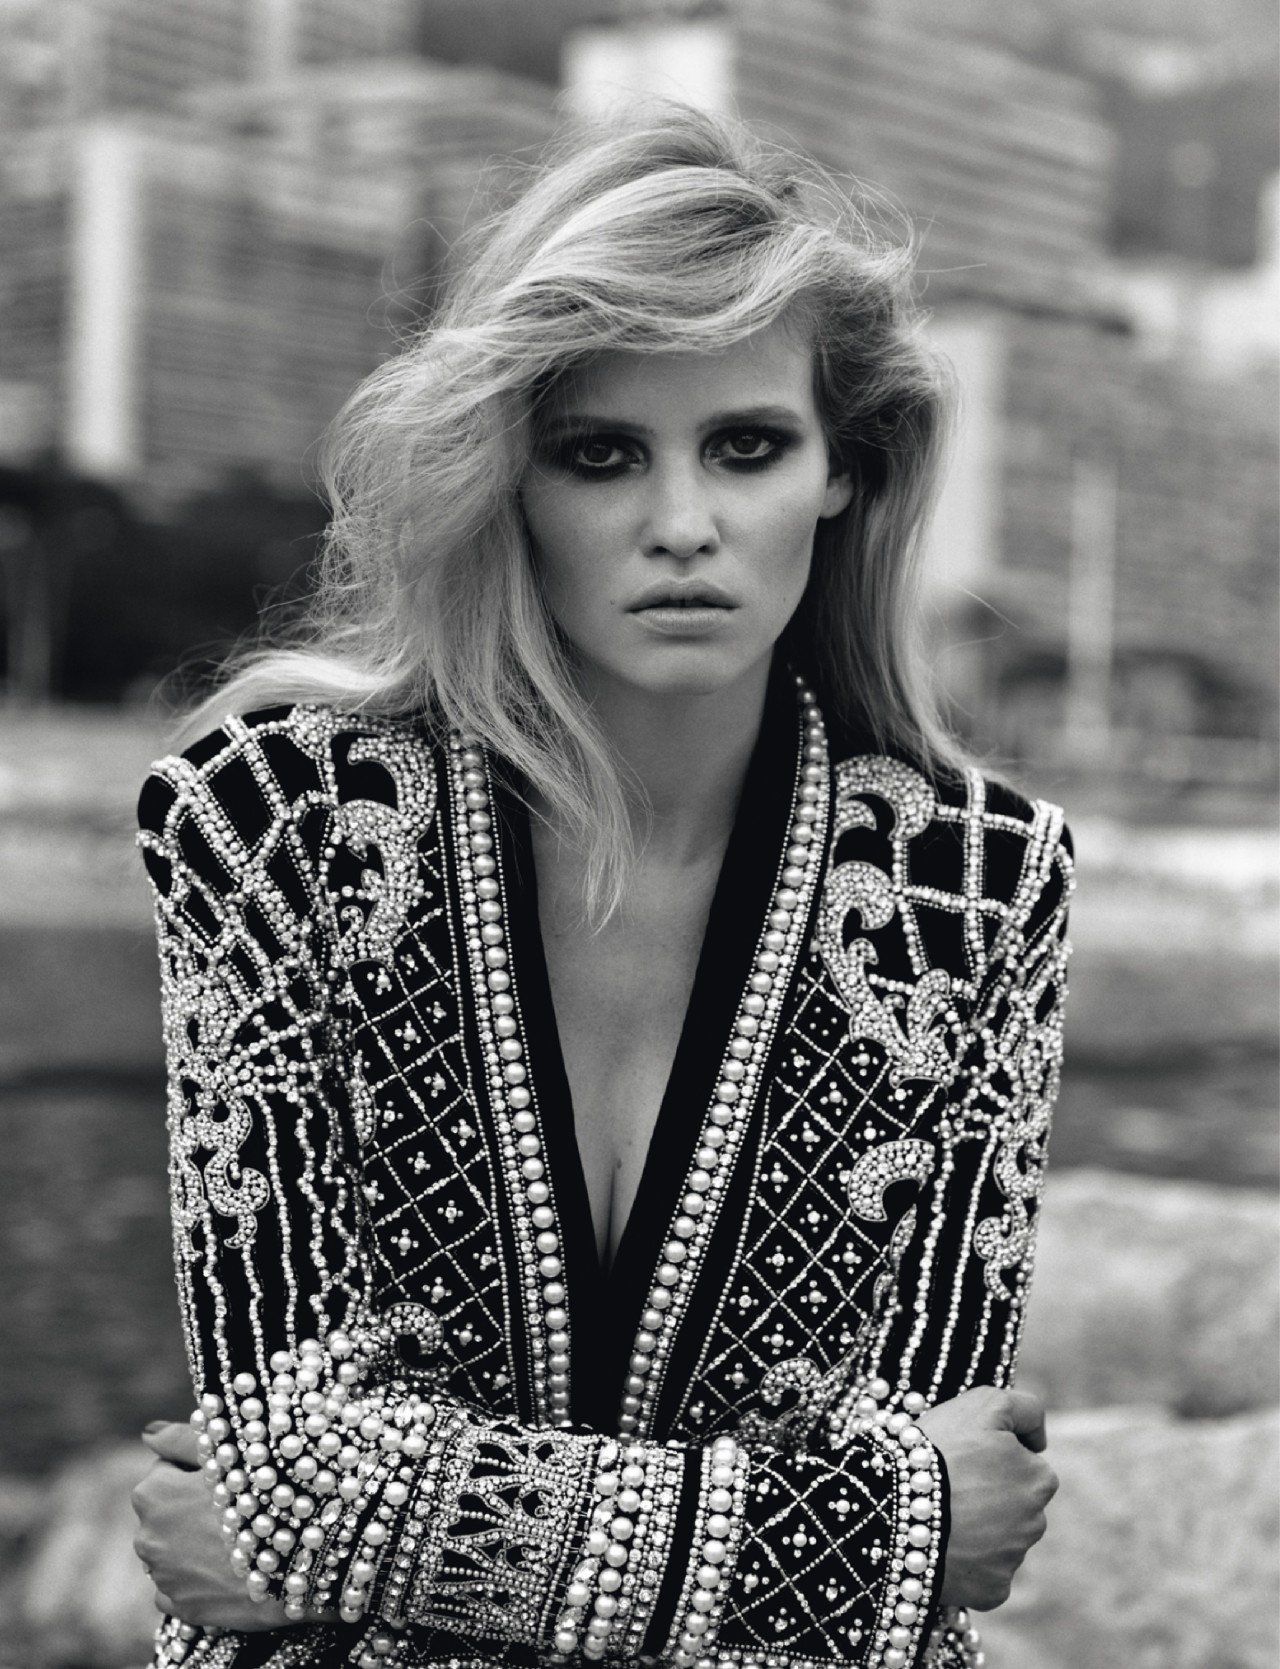 Lara Stone Photographed by Alasdair McLellan Published in Self Service #37, Autumn/Winter